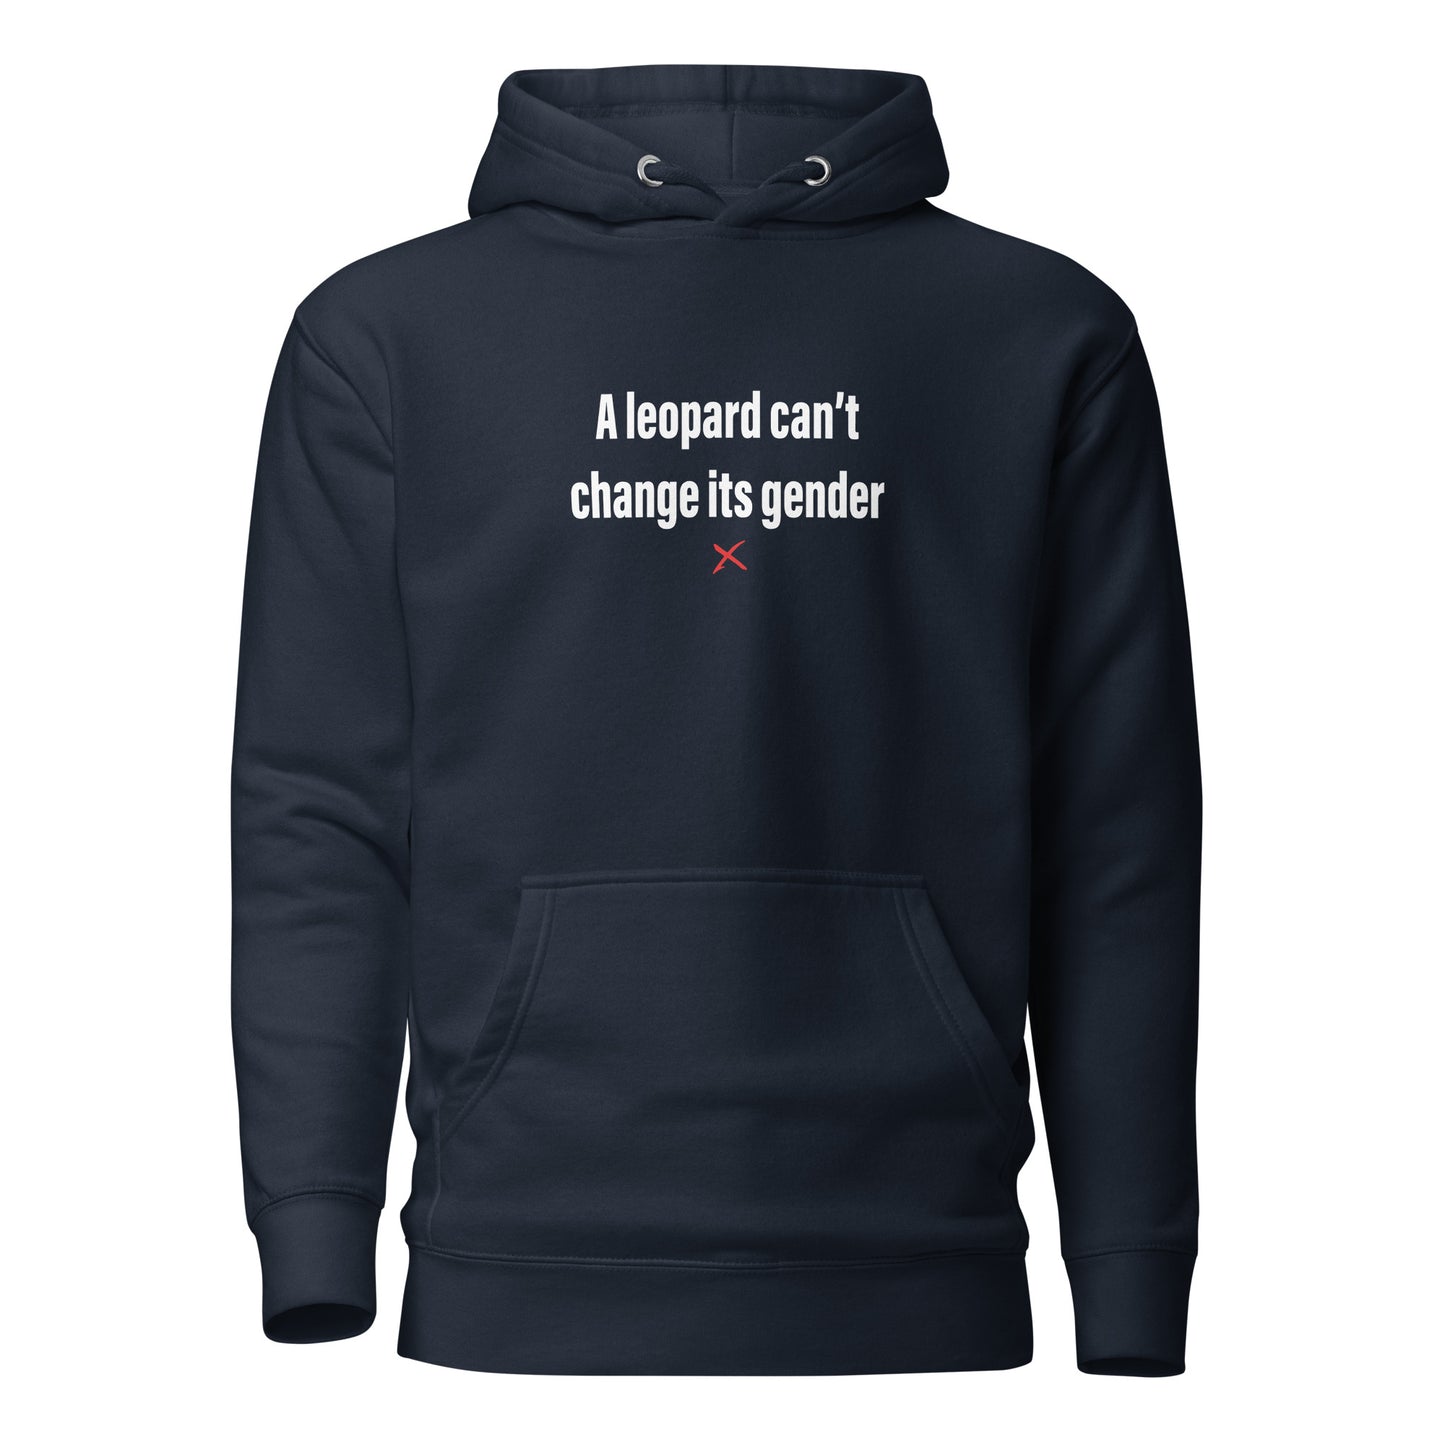 A leopard can't change its gender - Hoodie